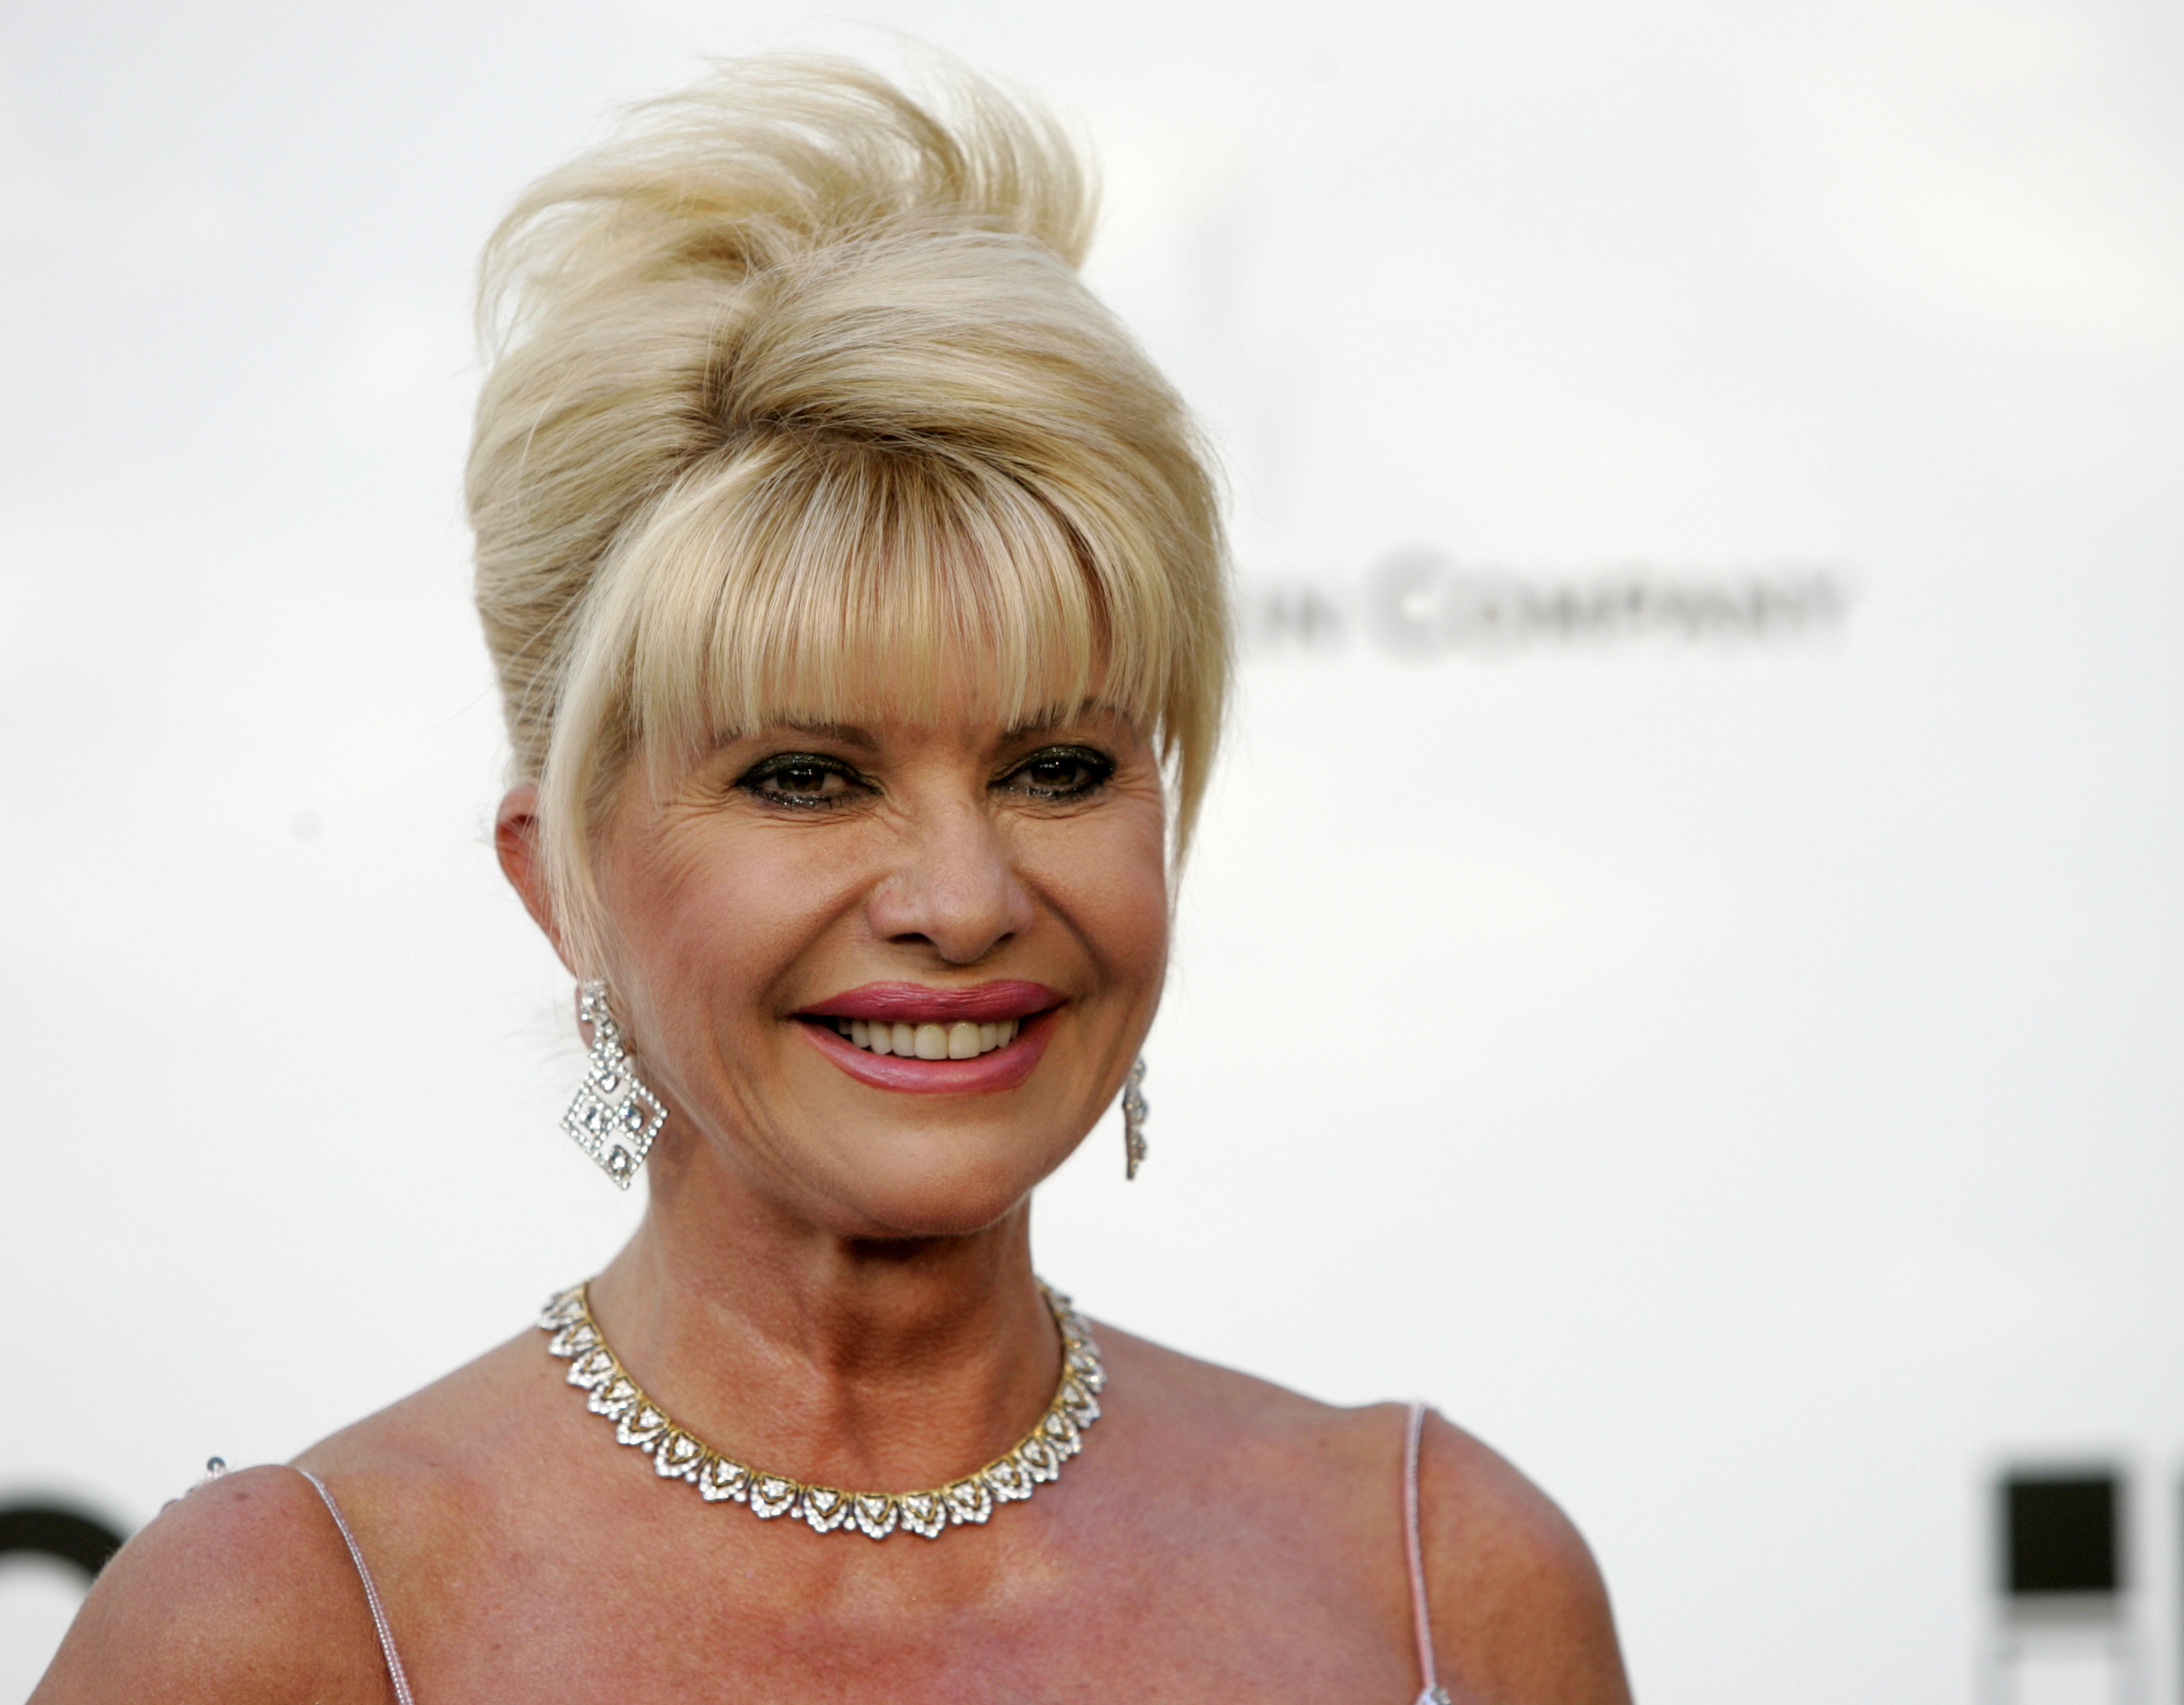 Ivana Trump, the first spouse of Donald Trump, is dead at 73